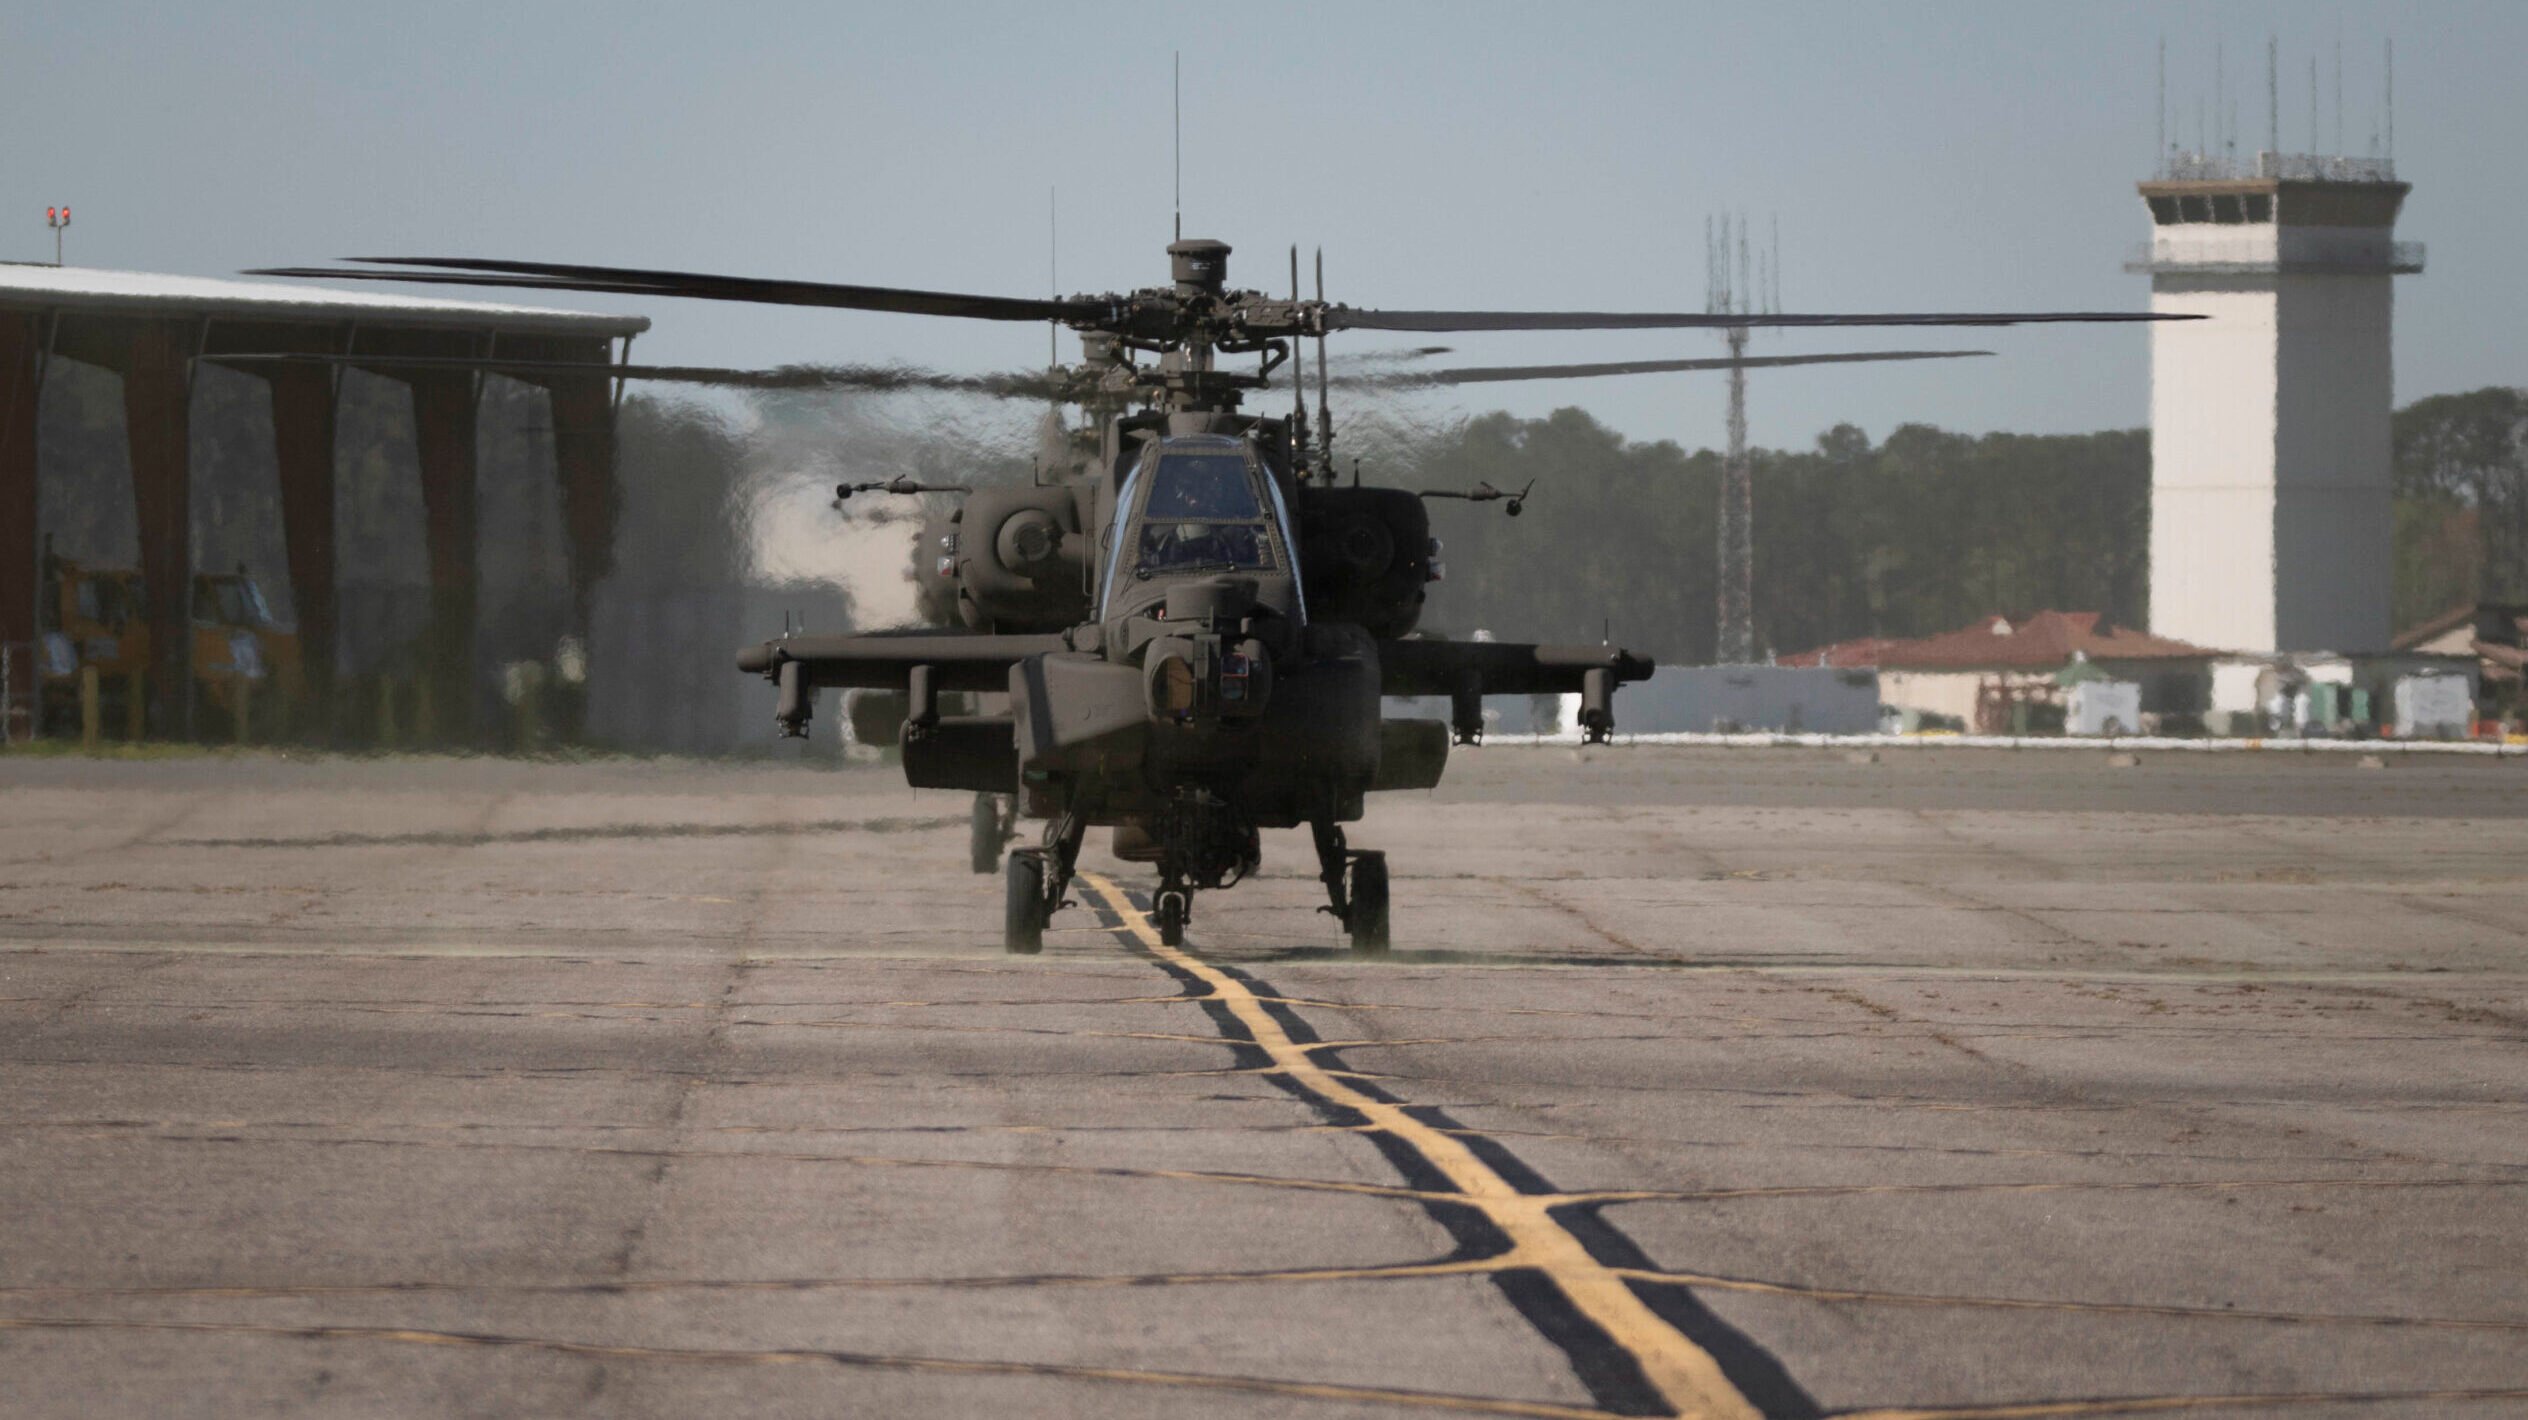 ‘Potentially hazardous’: AH-64E Apache generator failures causing ‘breathing and visibility issues’